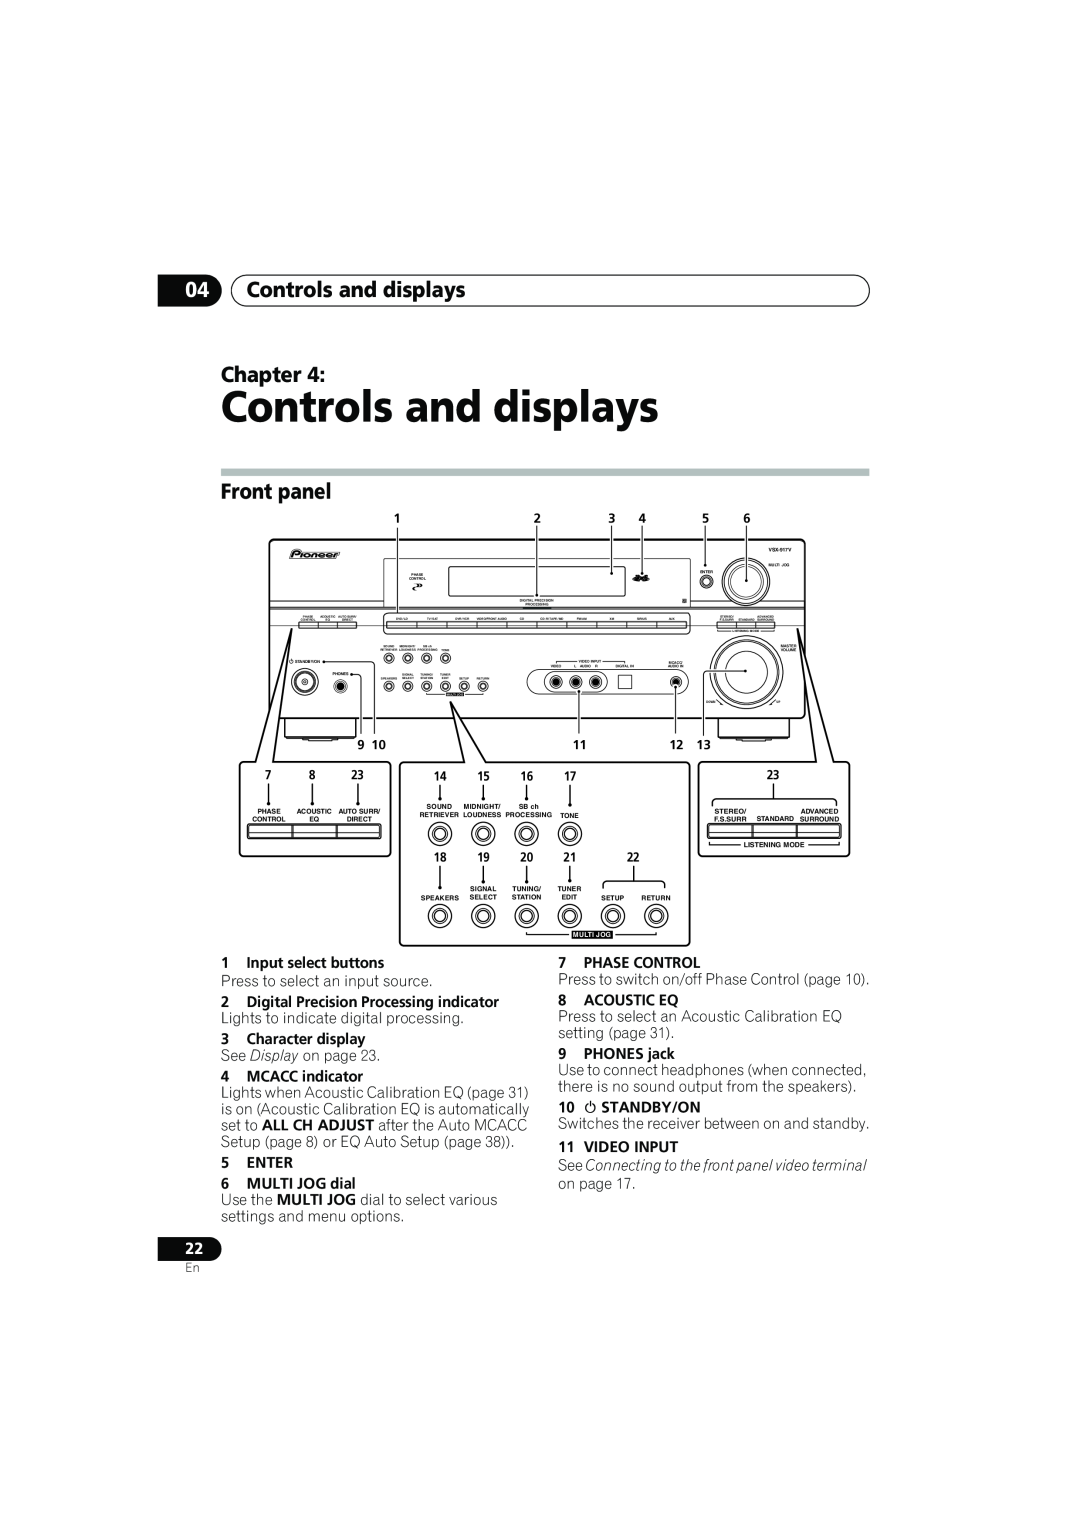 Pioneer VSX-917V manual 04Controls and displays Chapter, Front panel, See Connecting to the front panel video terminal 